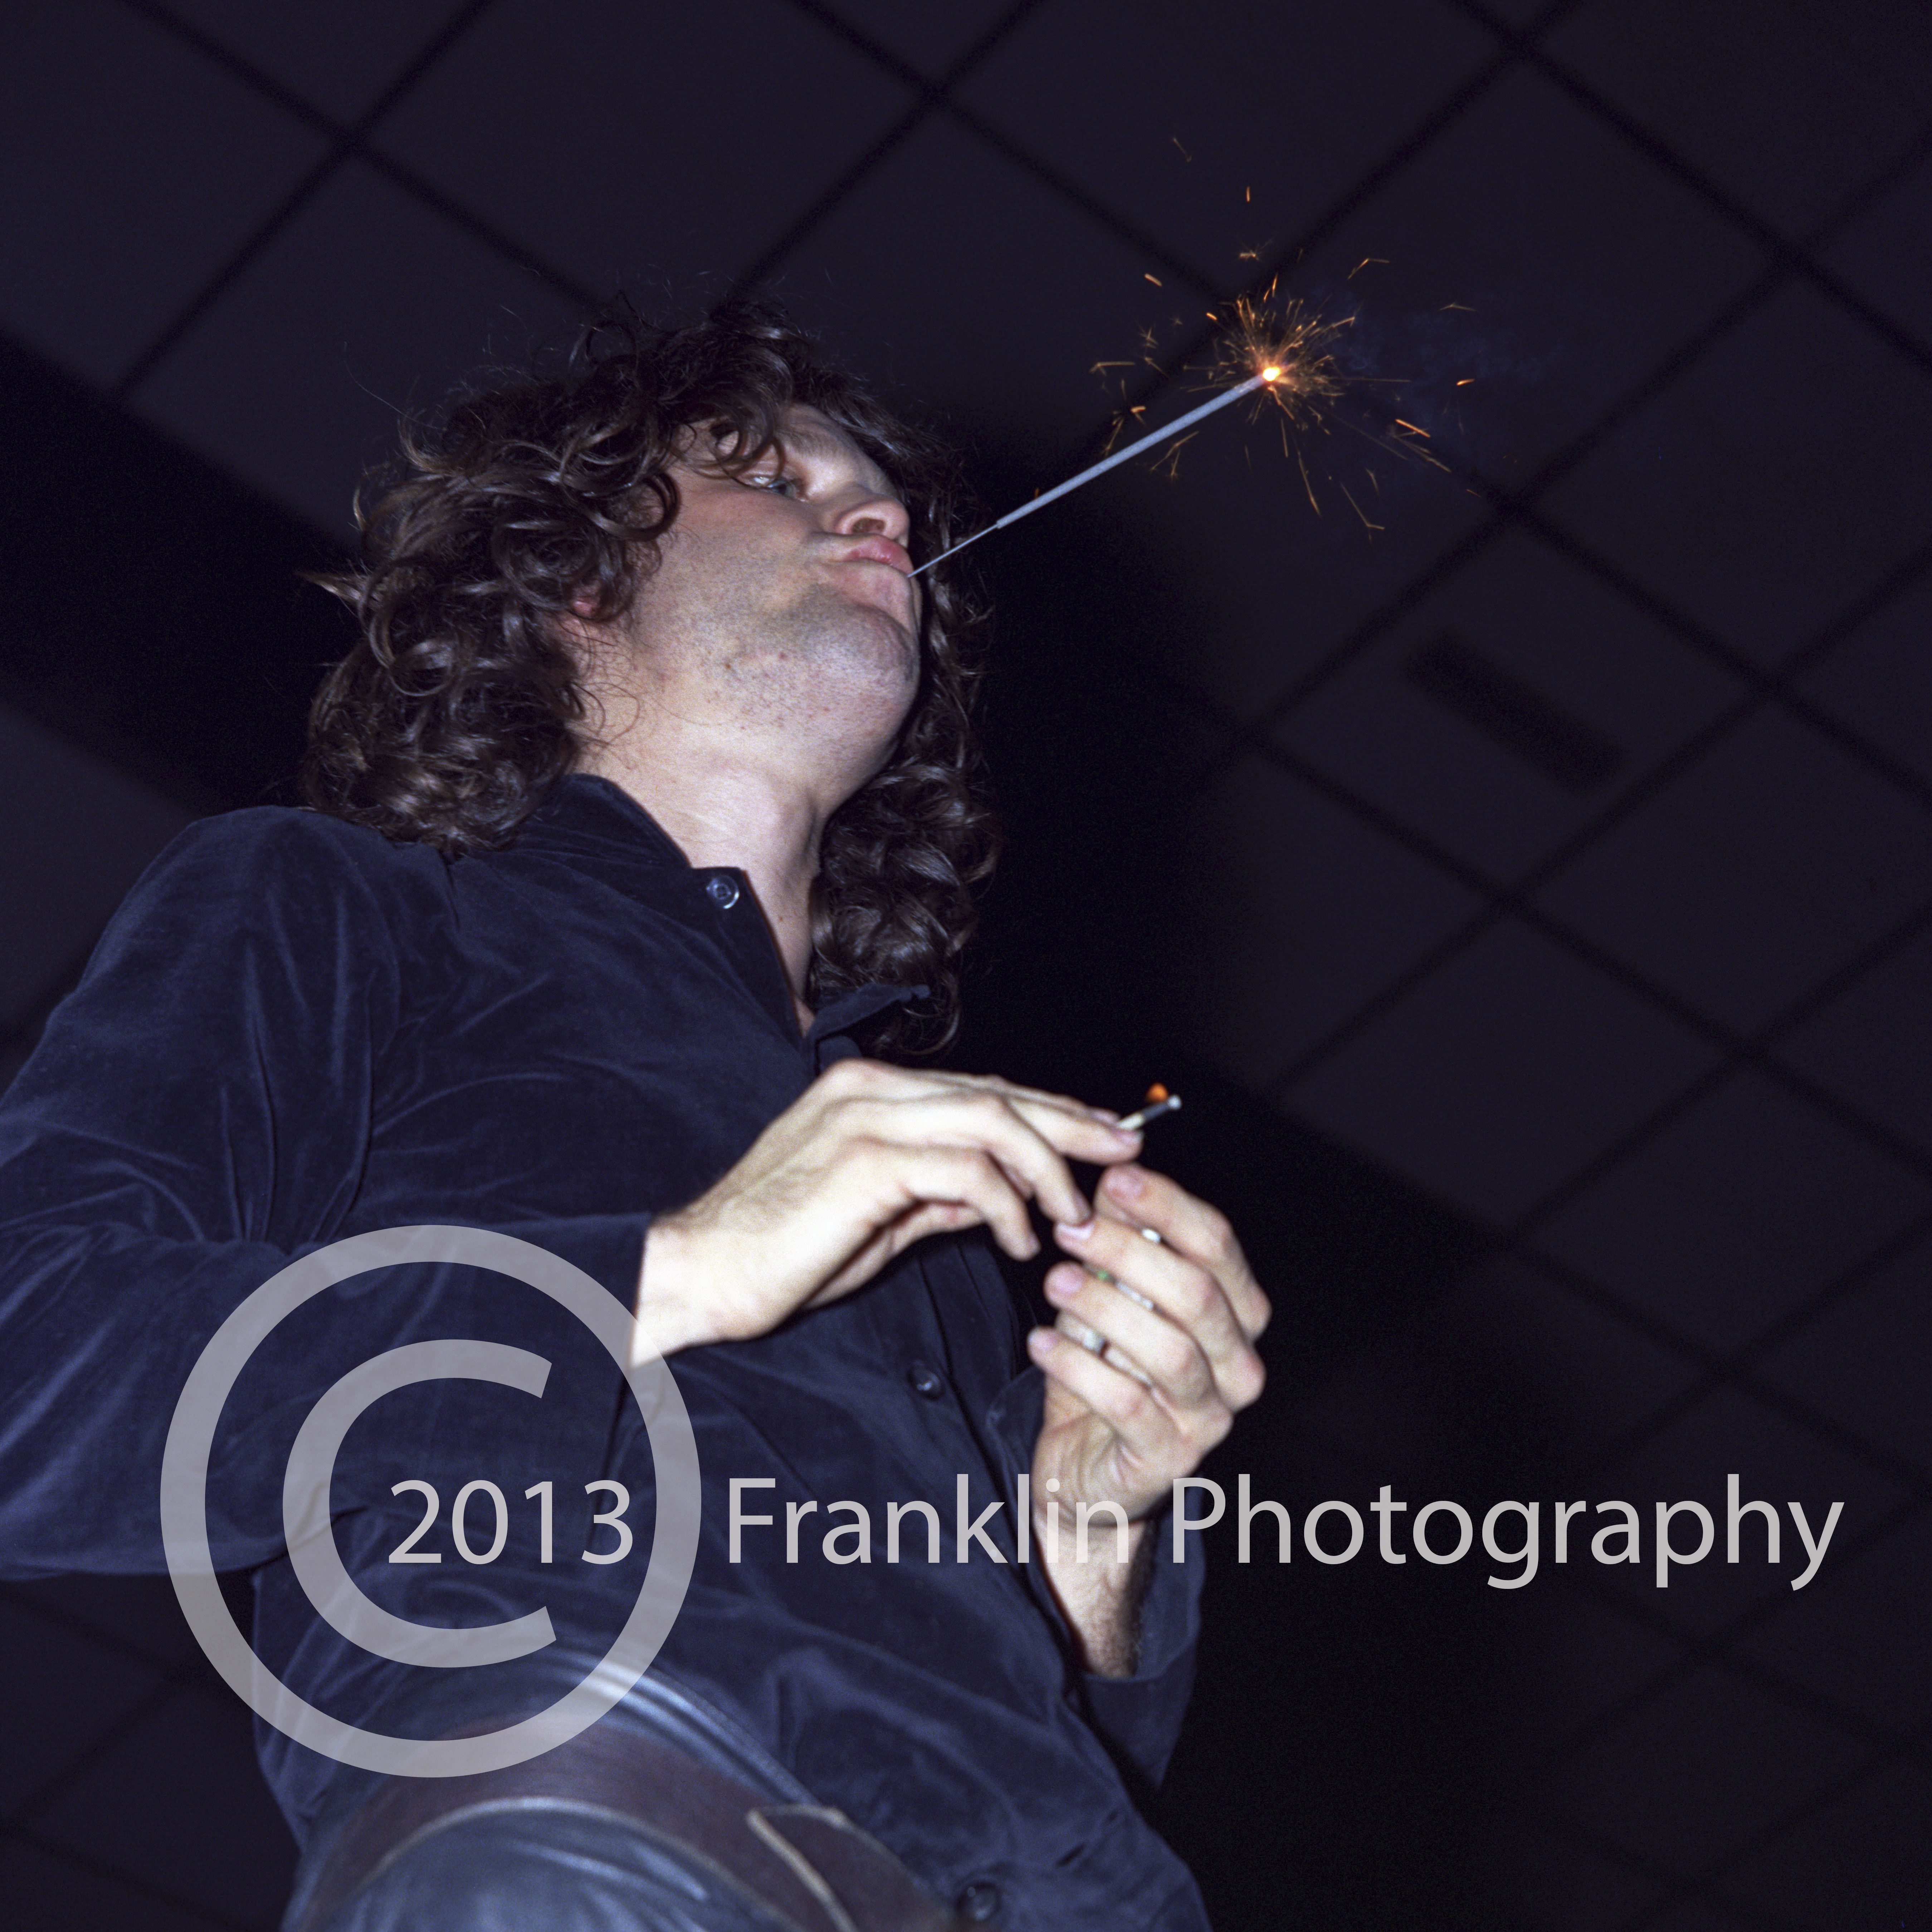 8408 Jim Morrison of The Doors onstage with a lit sparkler in his mouth at the Coliseum in Phoenix Arizona on 2-17-68. Photo by Tom Franklin.